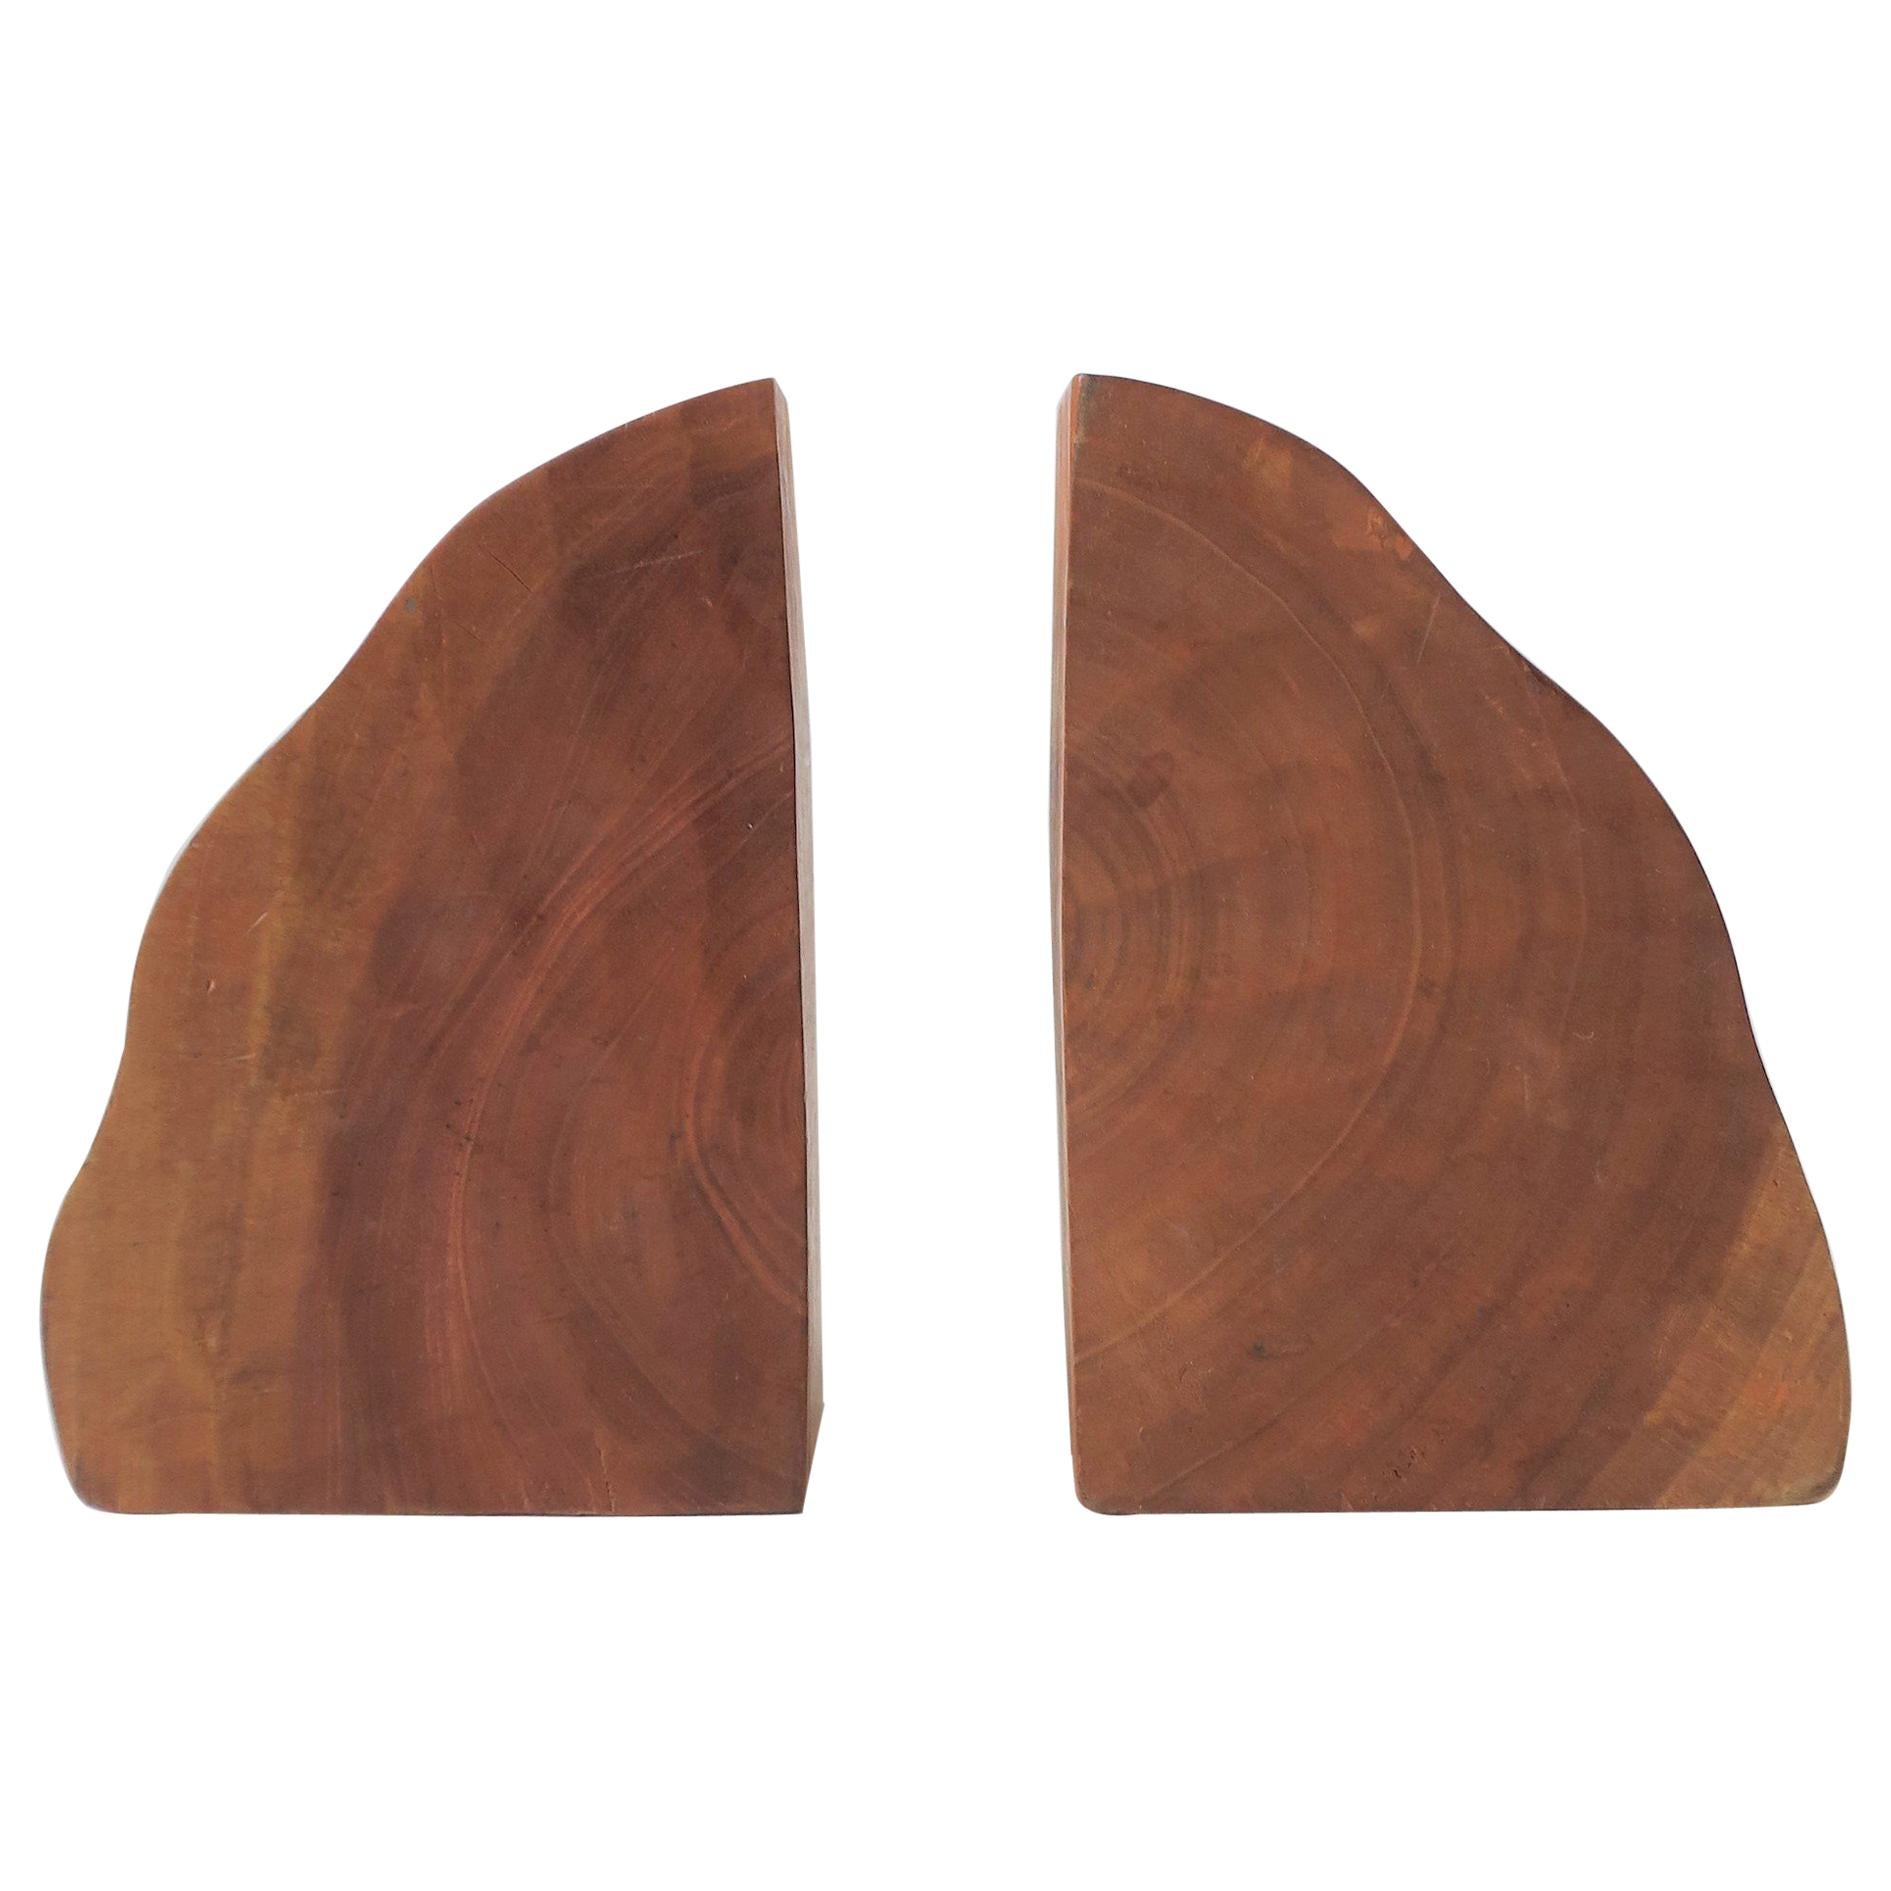 Pair of Natural Wood Bookends